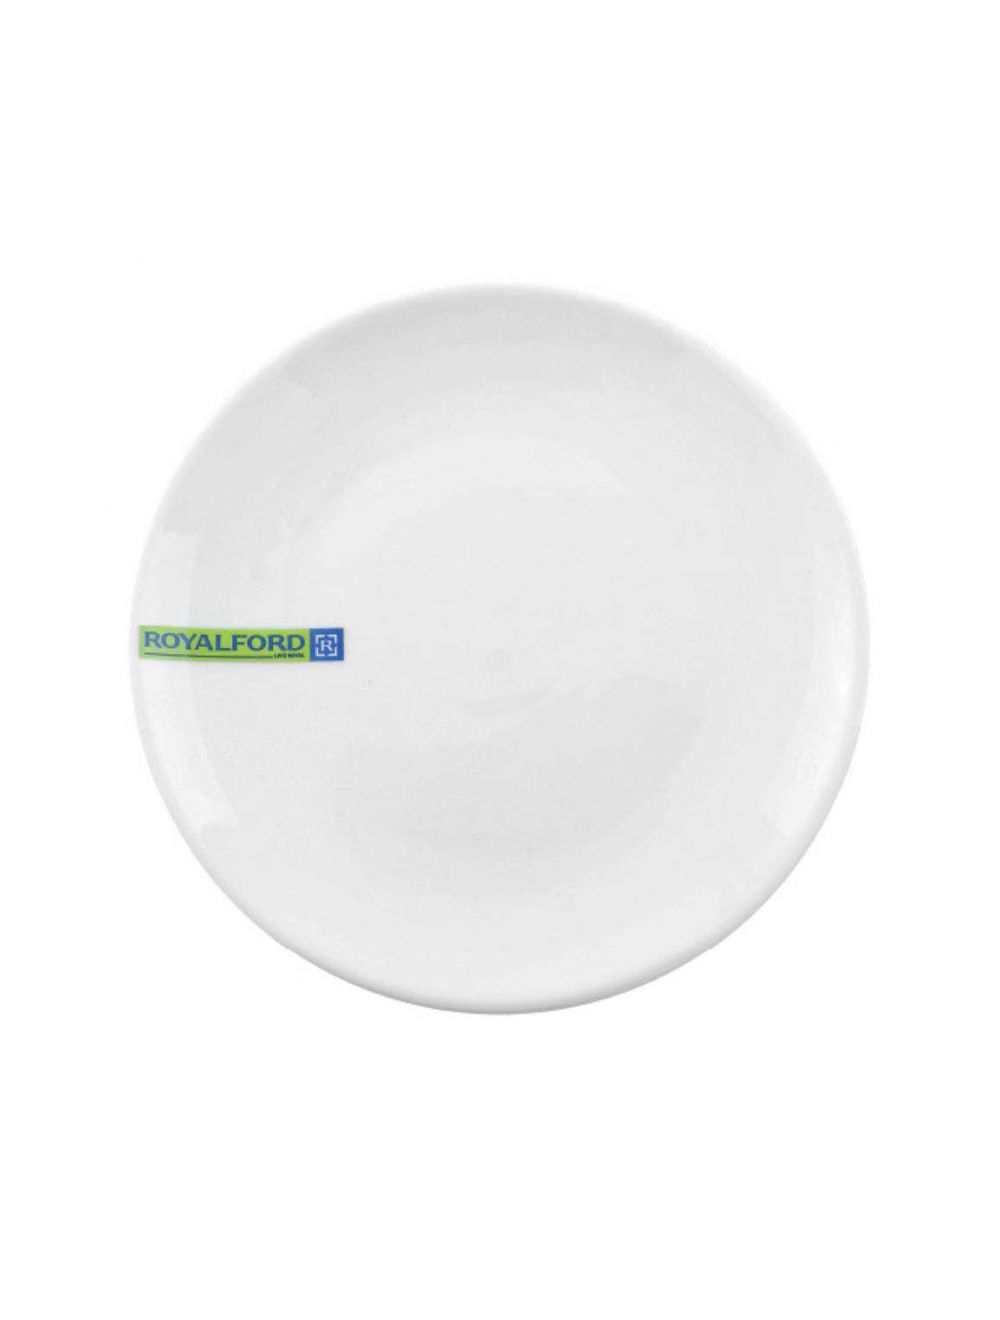 Royalford Porcelain Magnesia Flat Plate 9 Inch White